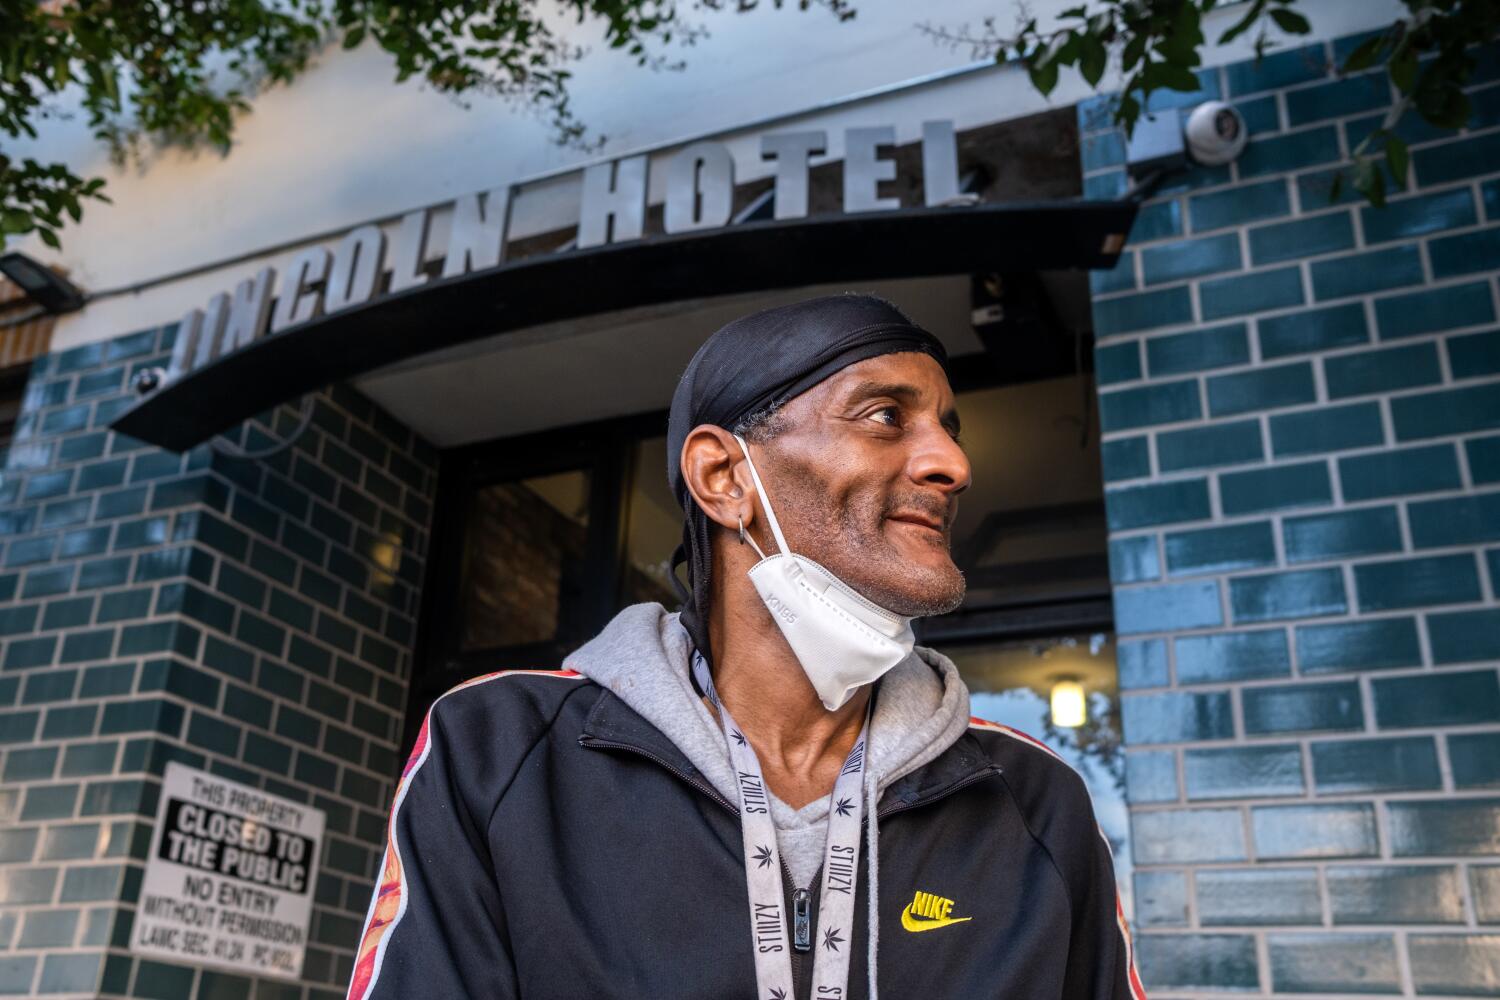 Image for display with article titled A Deal to Buy Skid Row Homeless Housing Fell Apart. Here's Why Vulnerable Tenants and Taxpayers Are at Risk